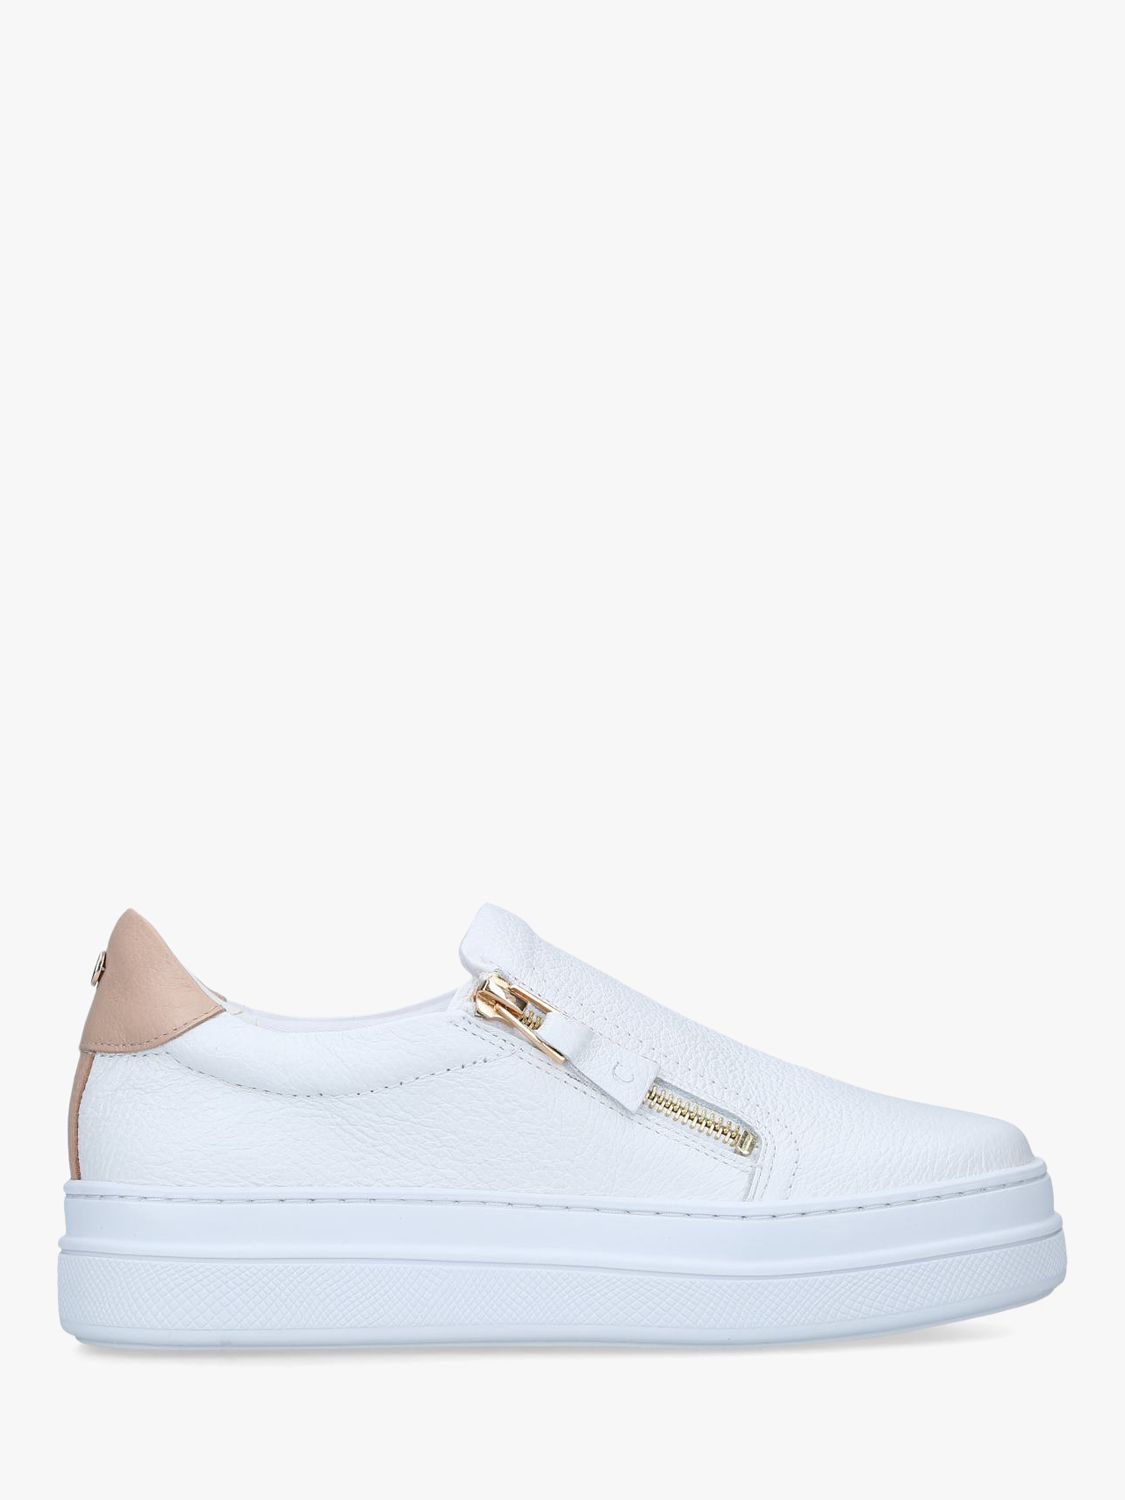 Carvela Comfort Cash Leather Slip On Trainers White 5 female Upper: leather, Sole: synthetic, Lining: textile